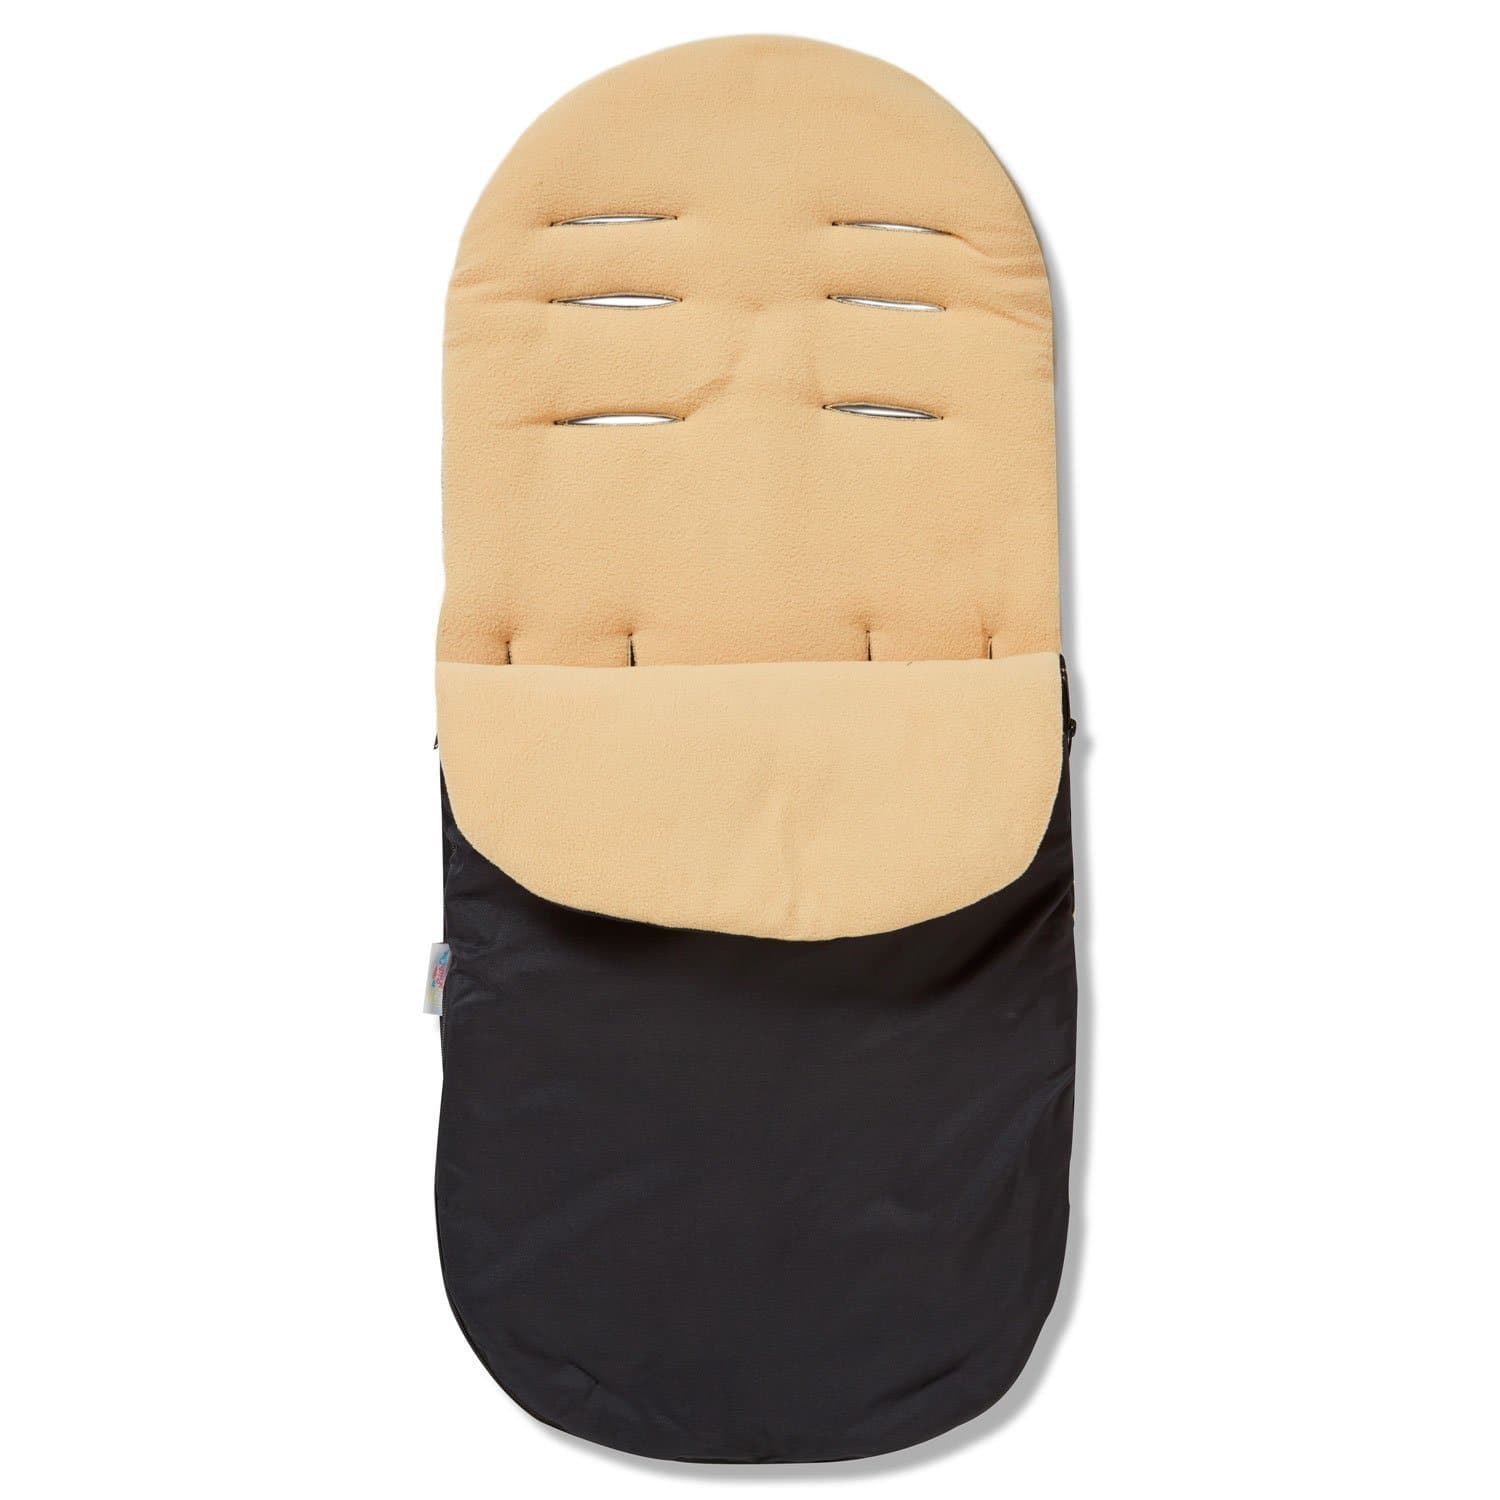 Footmuff / Cosy Toes Compatible with Urban Detour - Sand / Fits All Models | For Your Little One